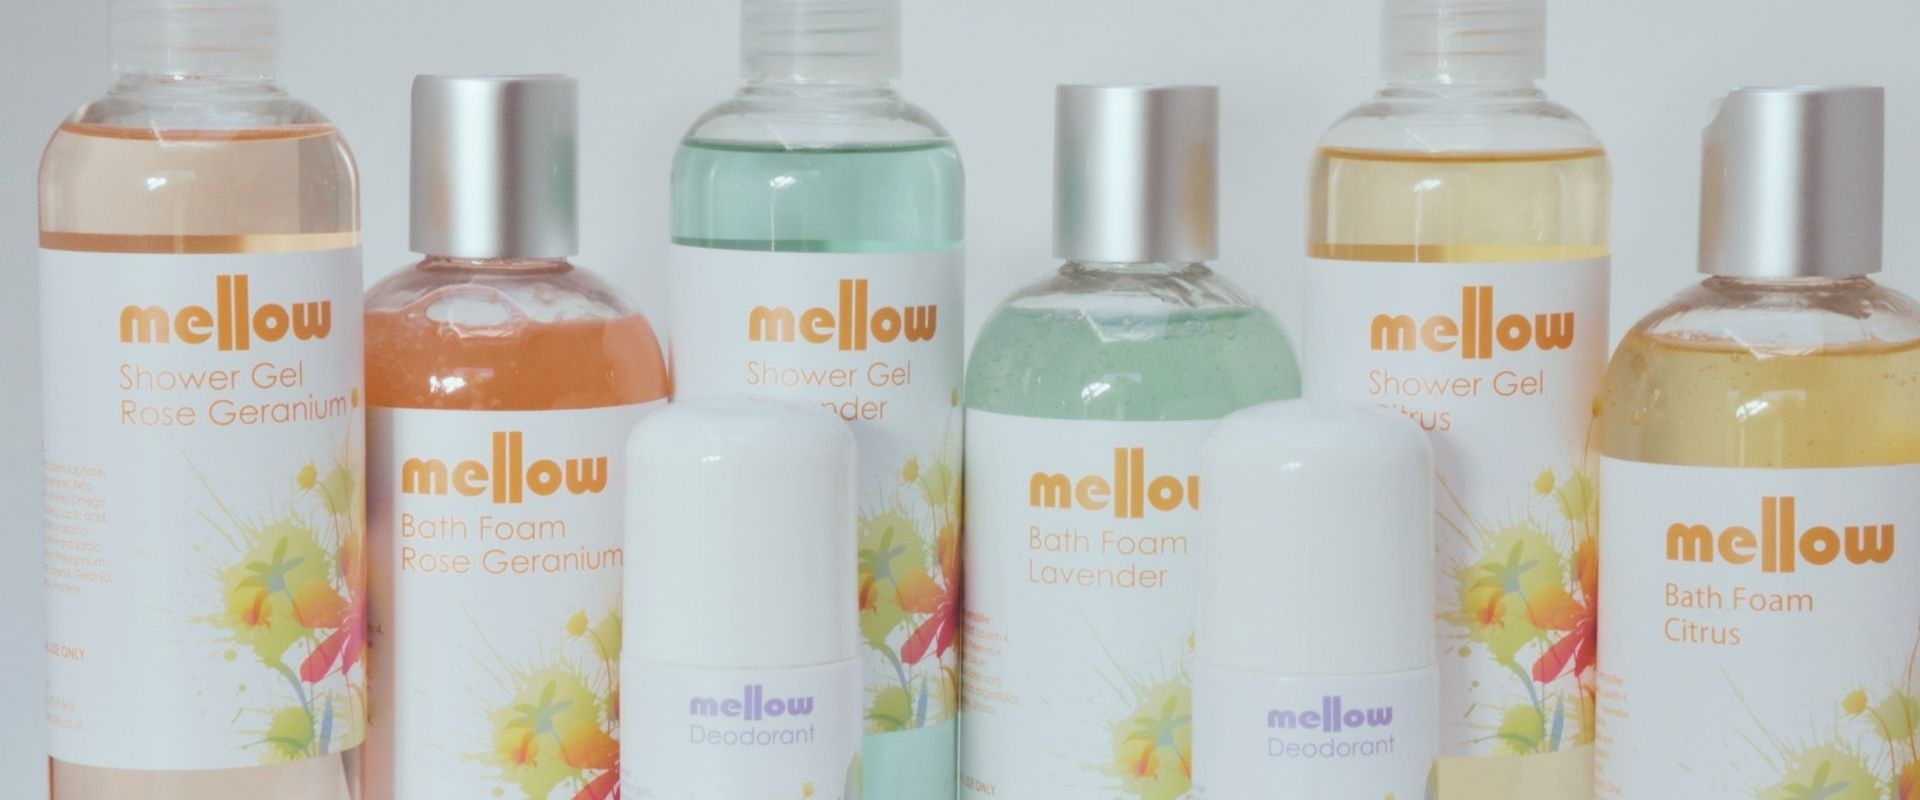 mellow-skincare-soak-range-natural-bath-and-shower-products